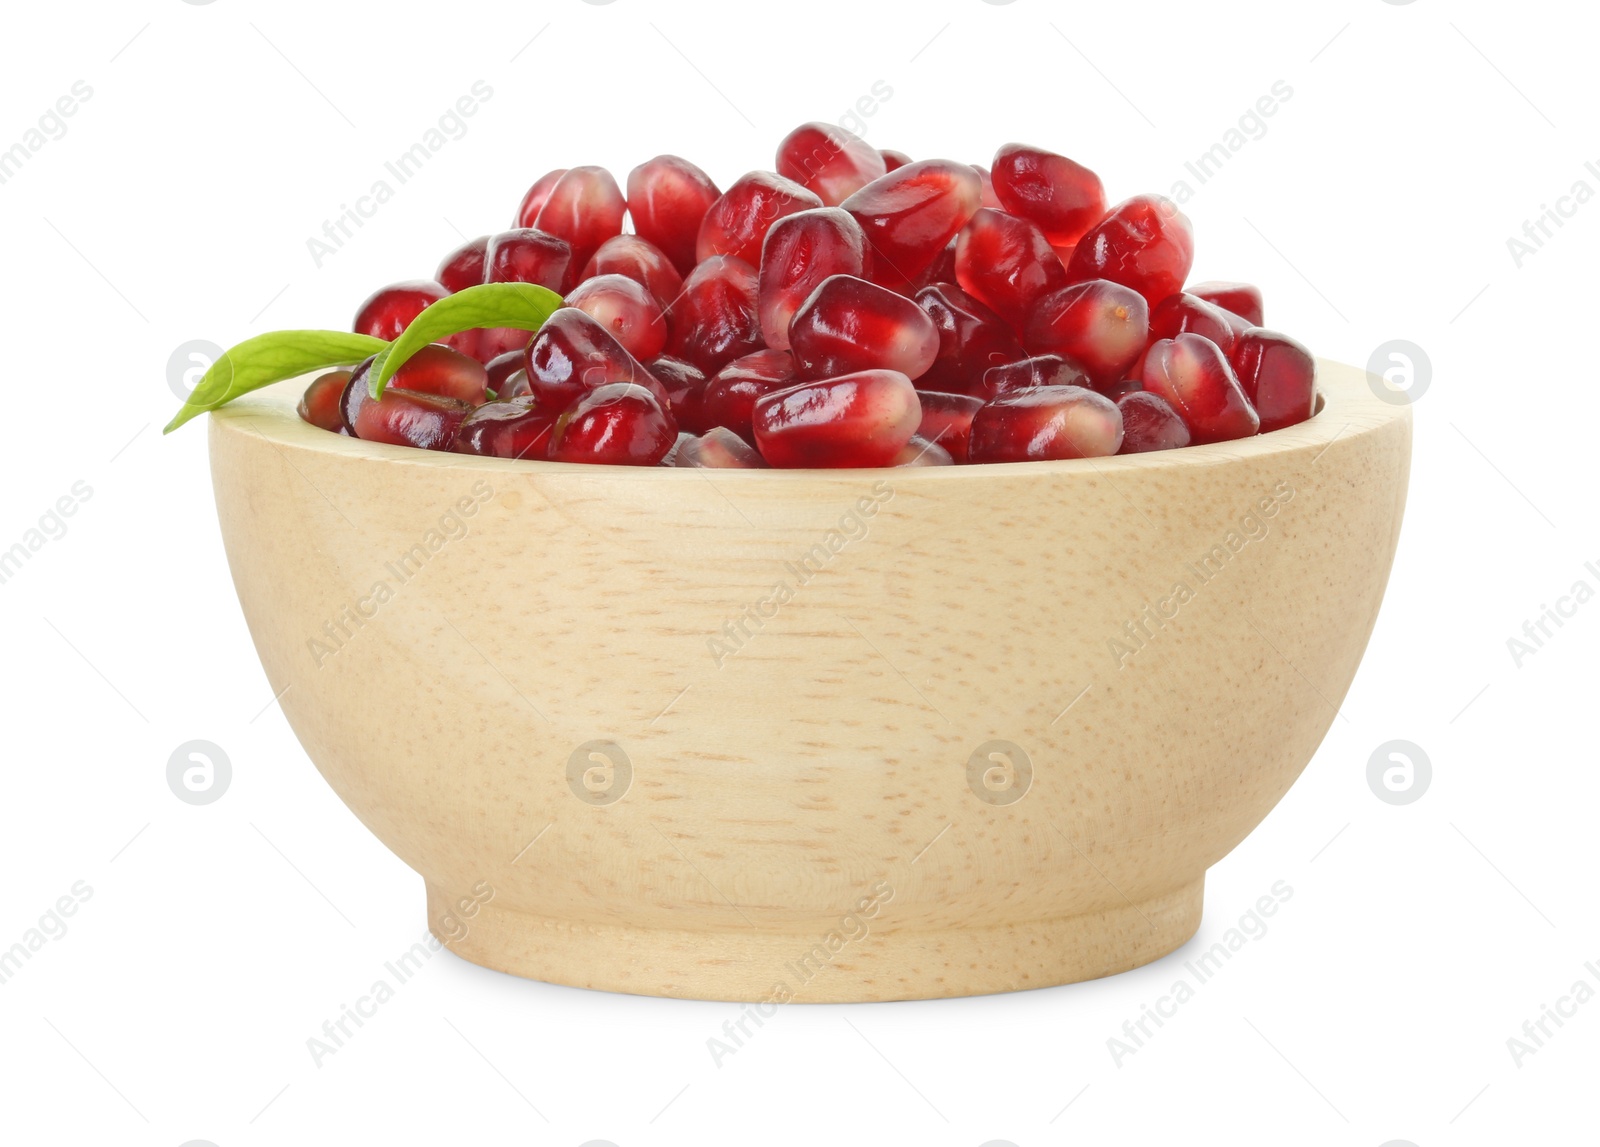 Photo of Ripe juicy pomegranate grains and leaves in wooden bowl isolated on white